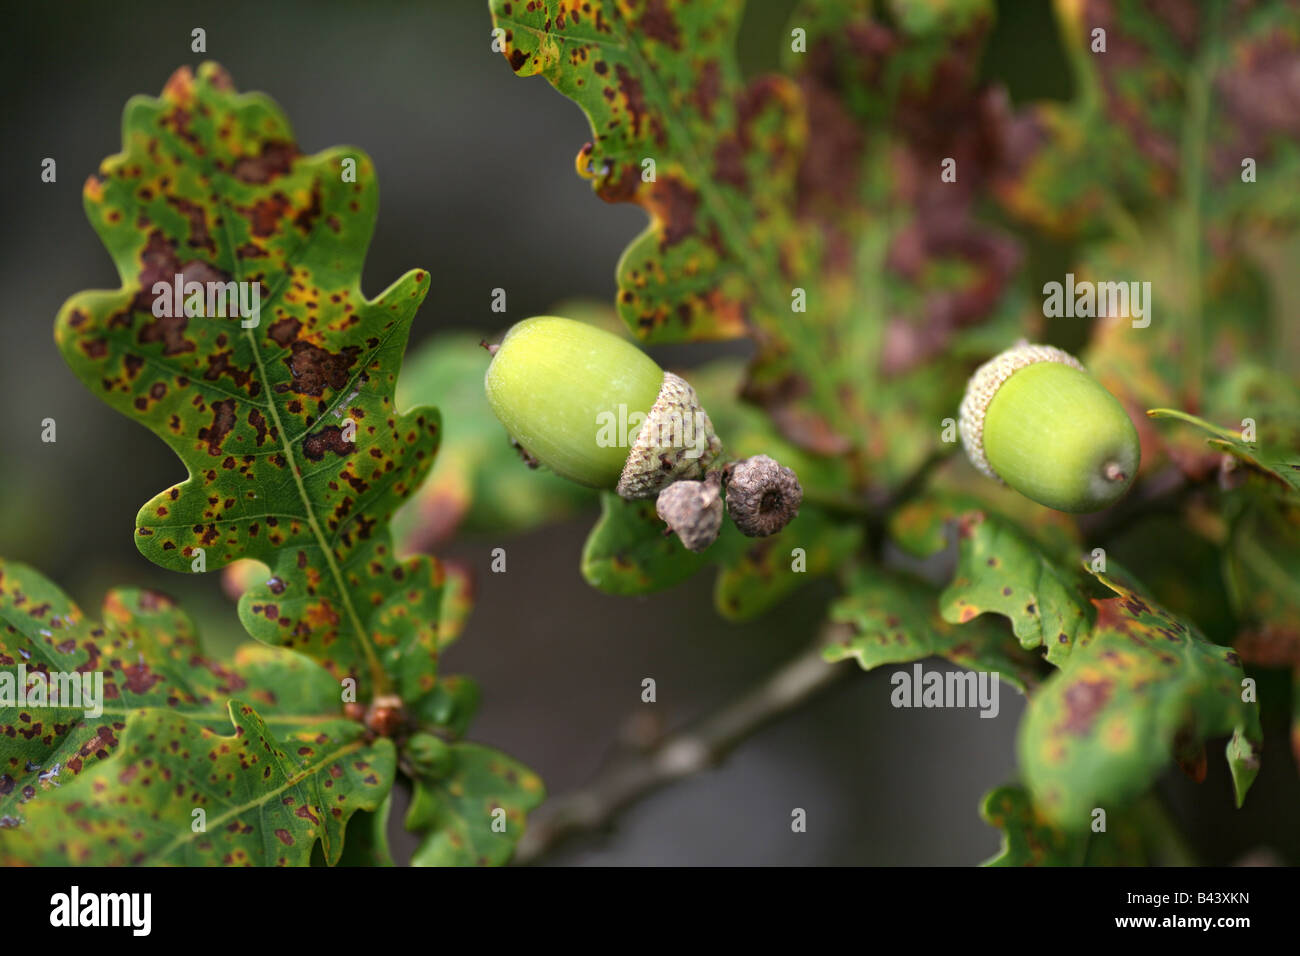 Acorns and leaves of a Common Oak tree Stock Photo